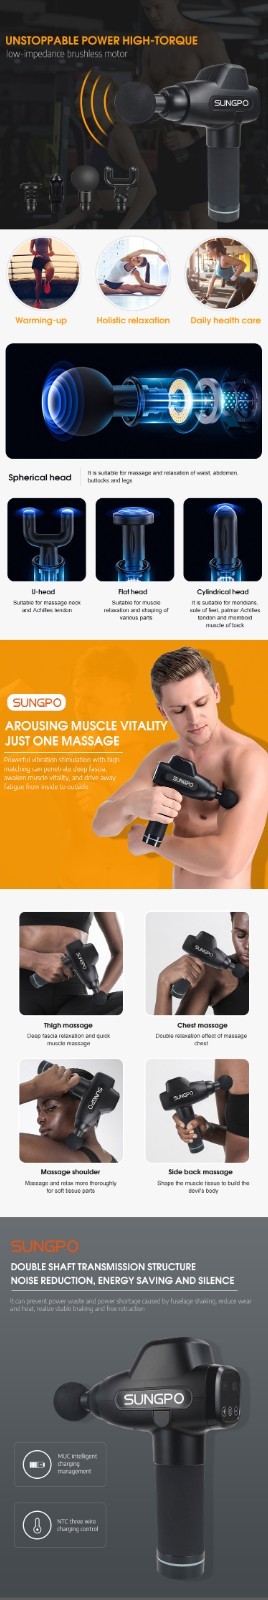 SUNGPO durable muscle massager machine supplier for muscle recovery